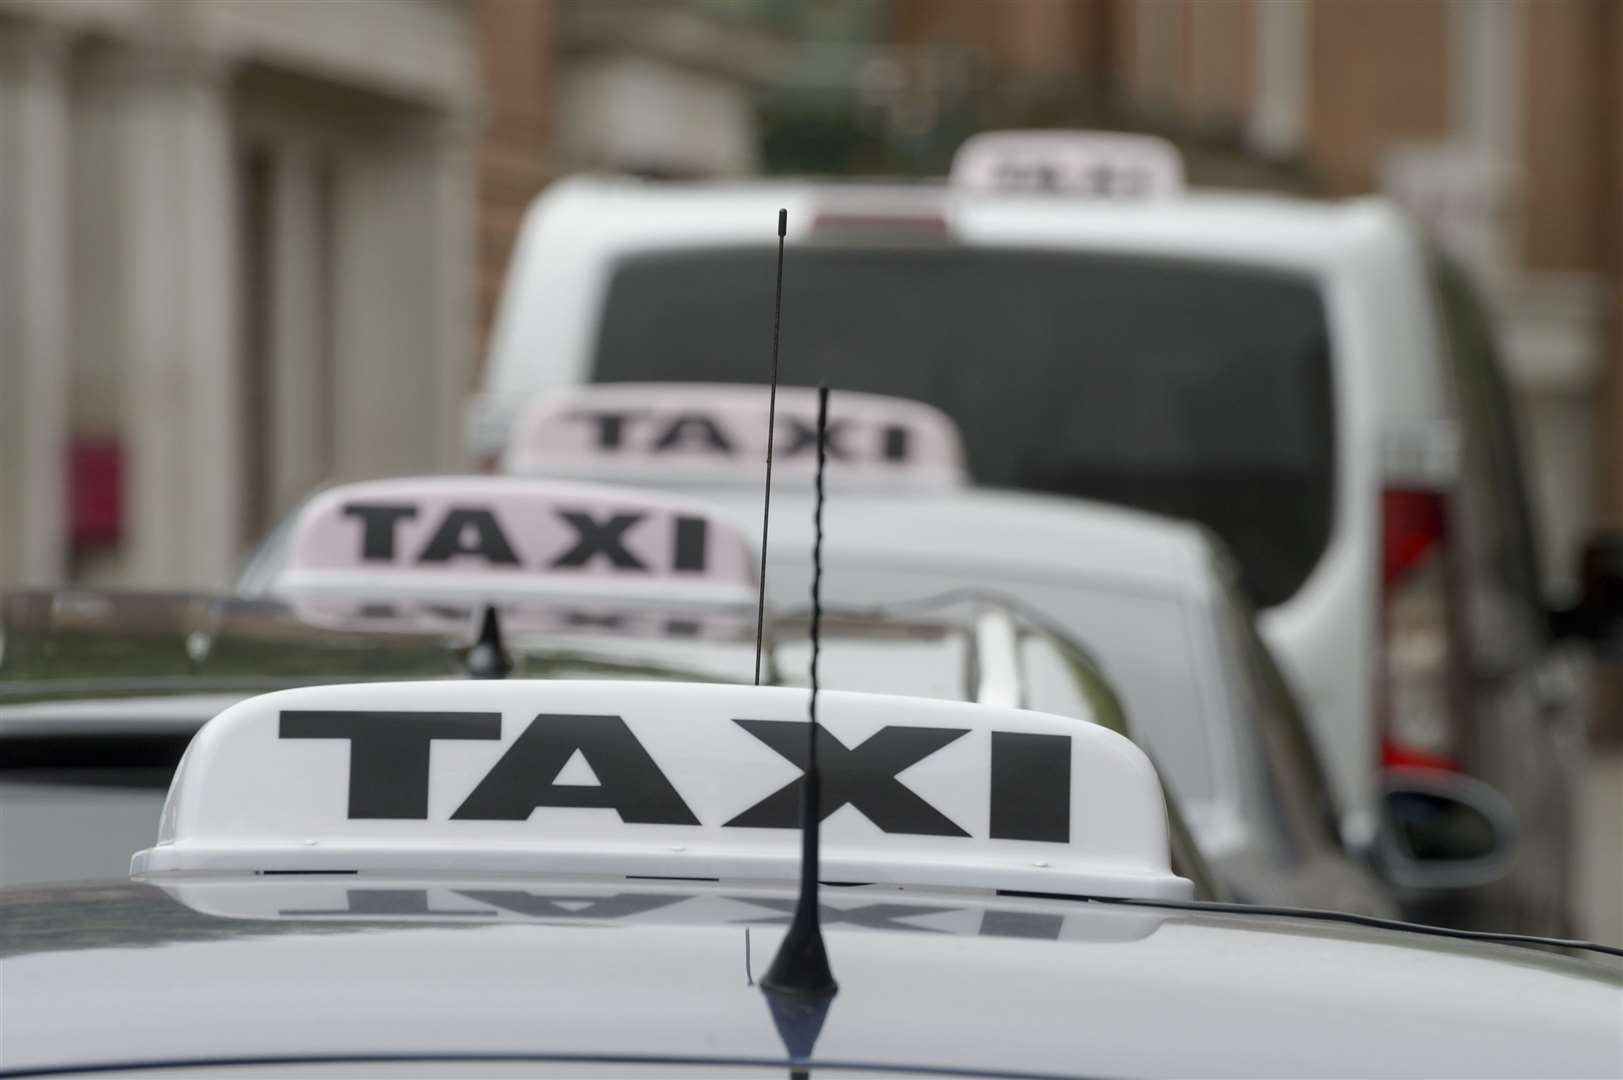 Canterbury City Council bosses believe the incentives will help the district’s taxi and private-hire fleet “move to cleaner vehicles”